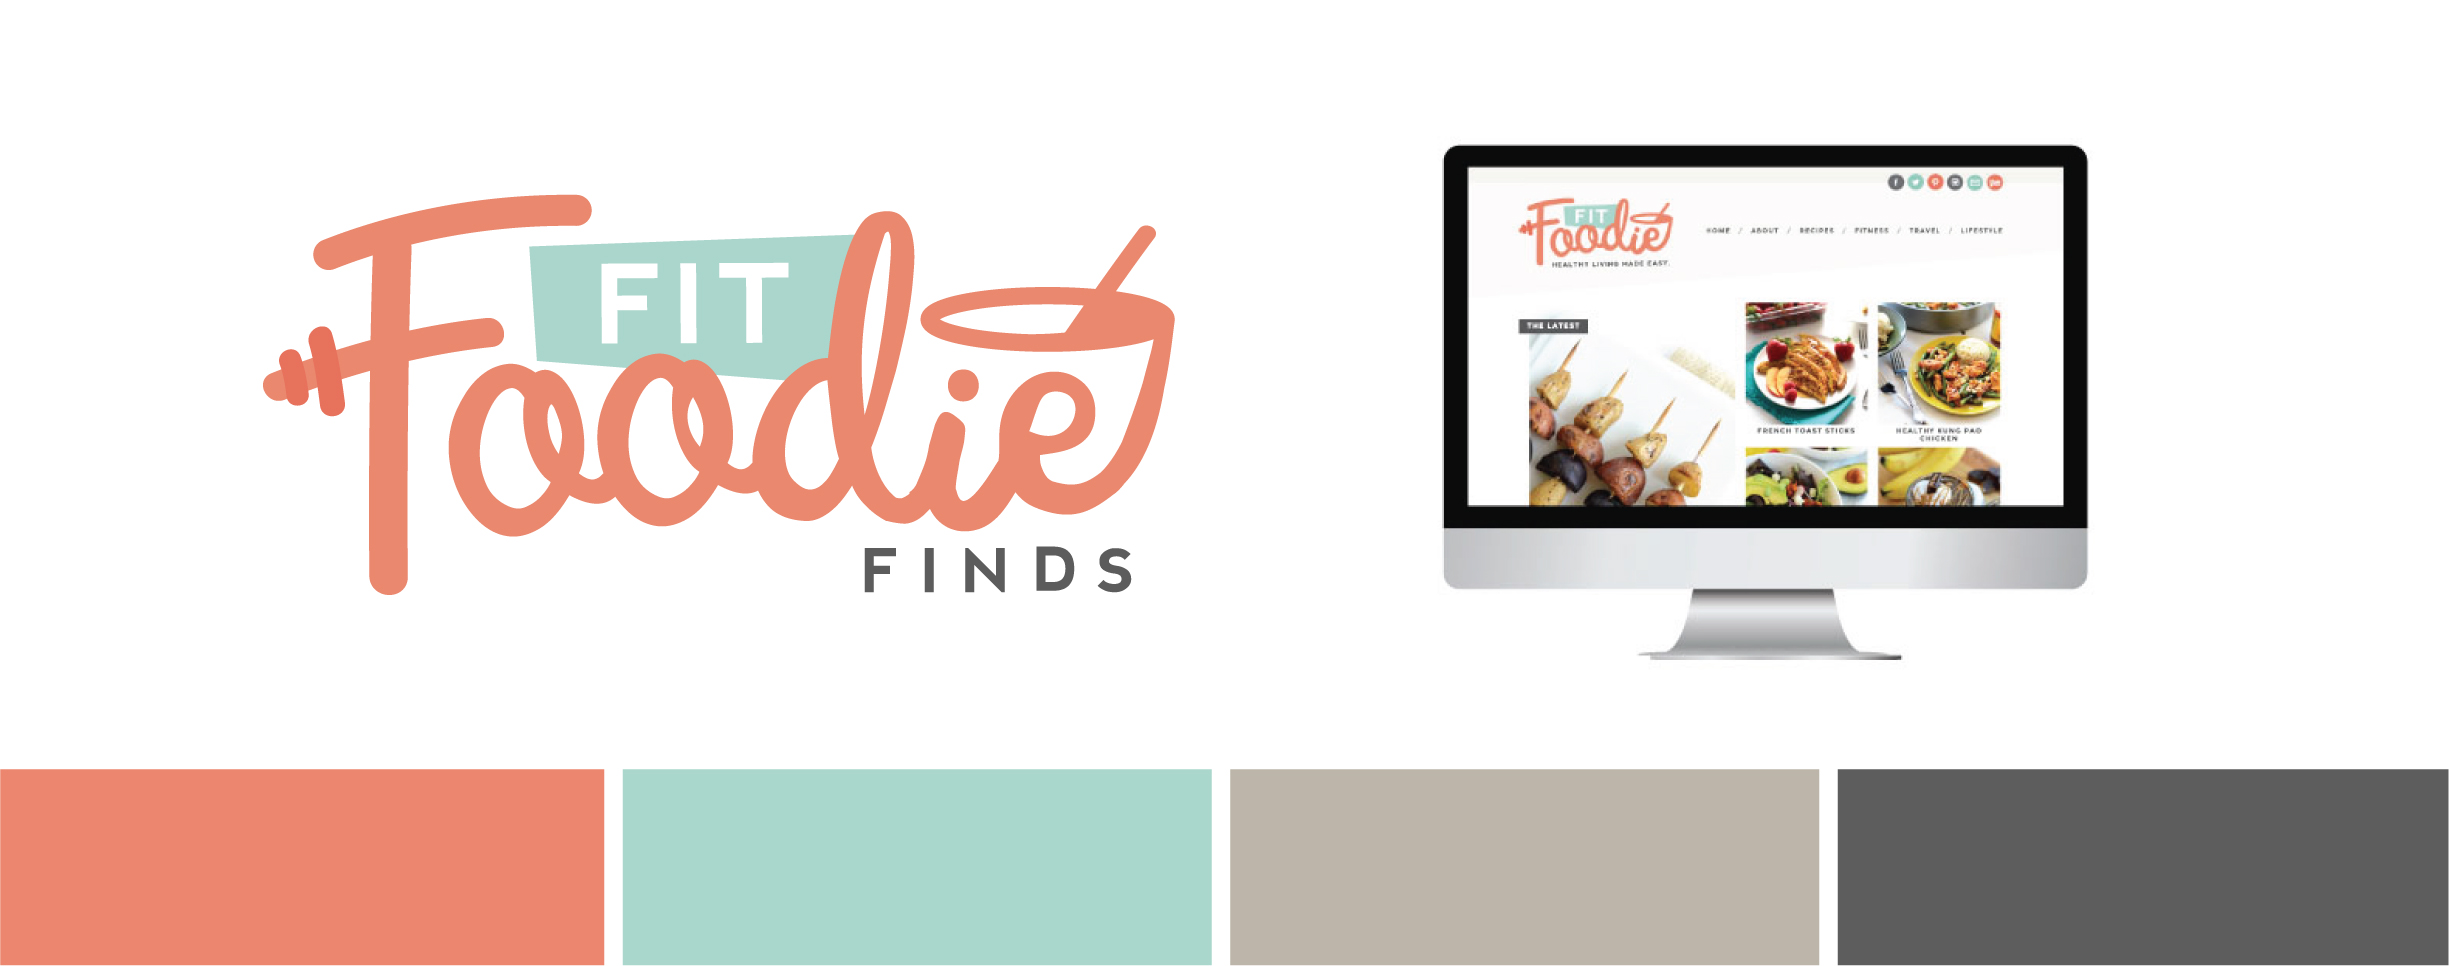 Graphic Designer and Brand Stylist, Melissa Rose, is showing you 6 Ways To Infuse Your Blog Color Palette into Your Blog's Branding. #foodblog | #blogdesign | www.melissarosedesign.com